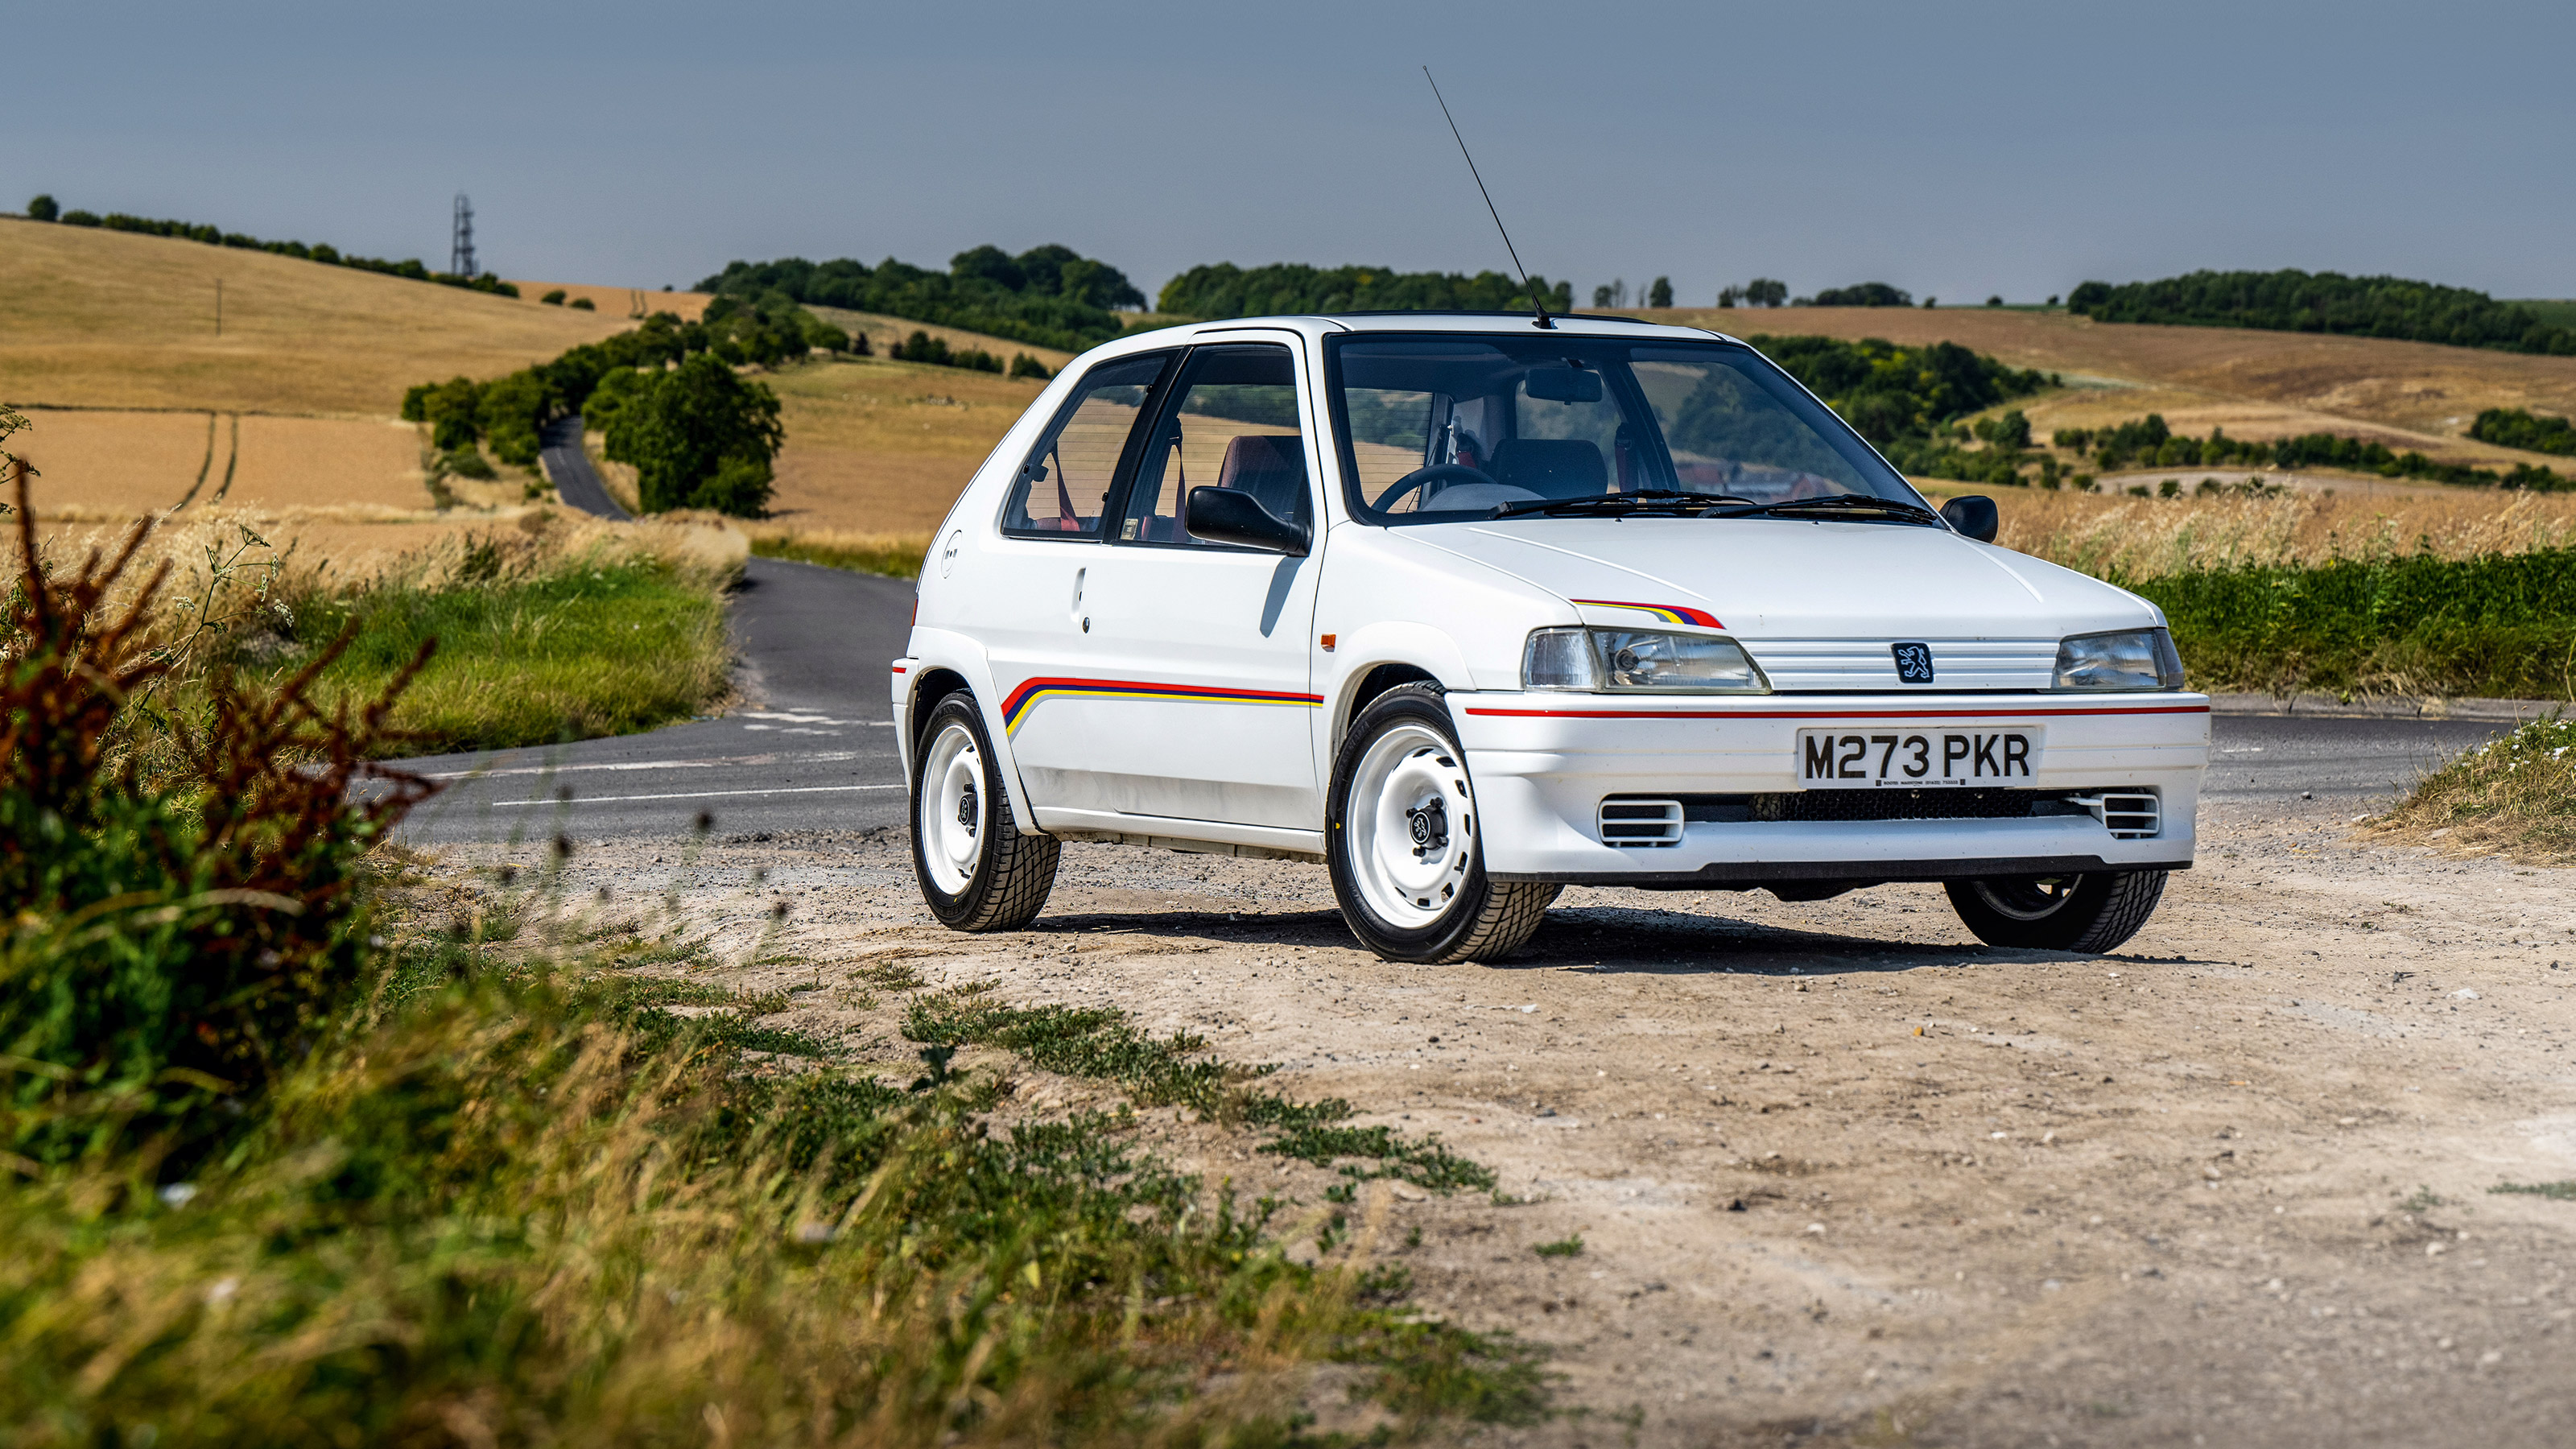 🐒 PEUGEOT 106 RALLYE - THE CRAZY SCREAMING HOT HATCH YOU'VE PROBABLY NEVER  HEARD OF! 